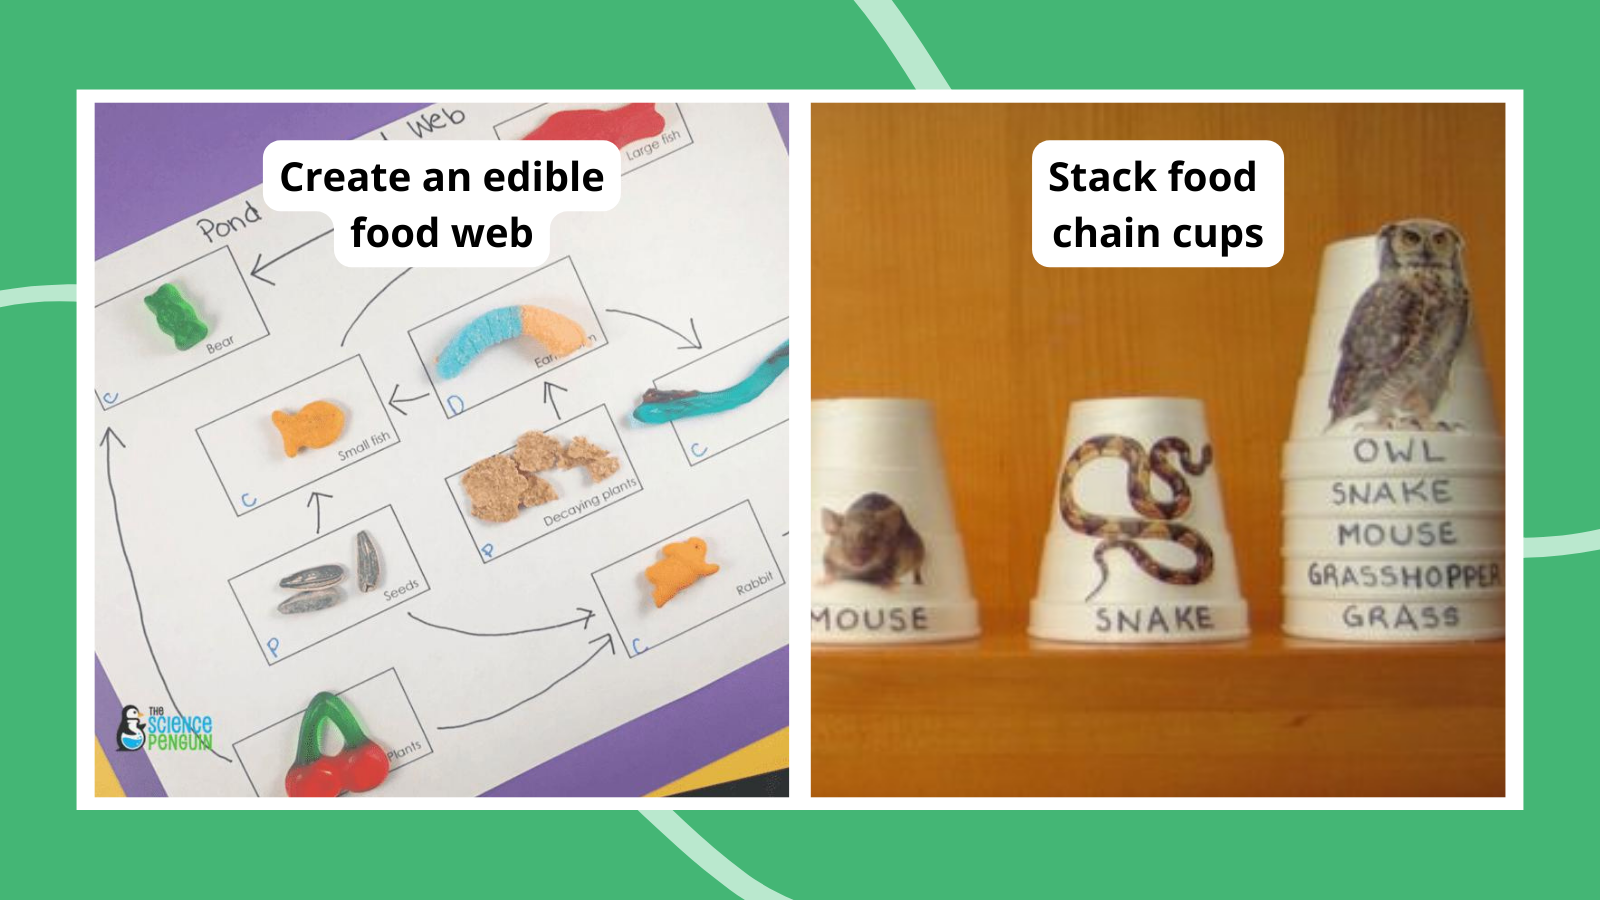 Examples of food web and food chain activities, including stacking food chain cups and creating an edible food web.